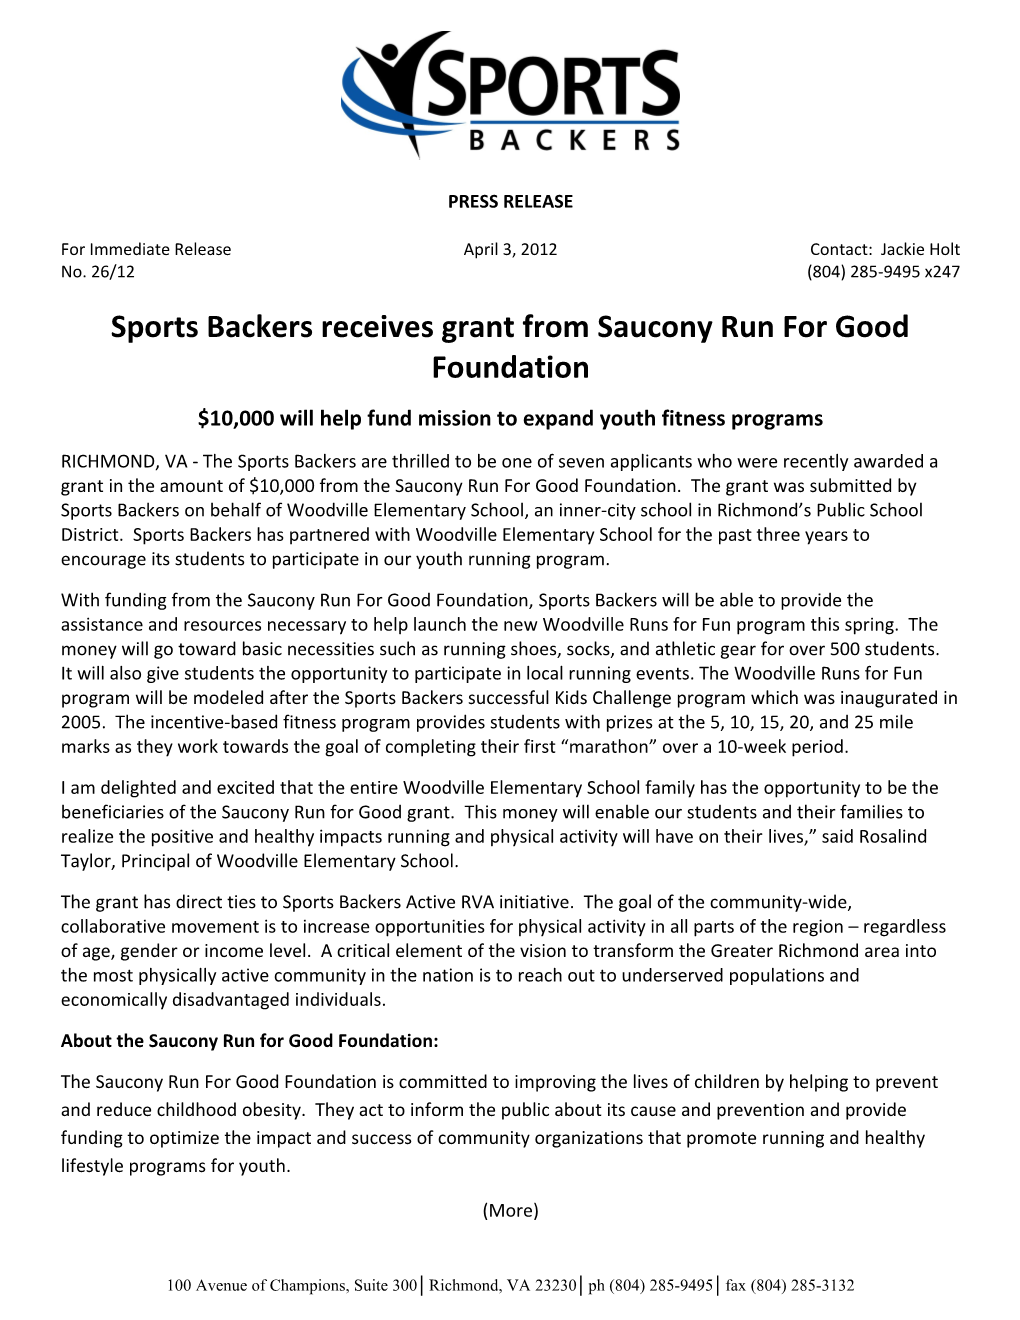 Sports Backers Receives Grant from Saucony Run for Good Foundation